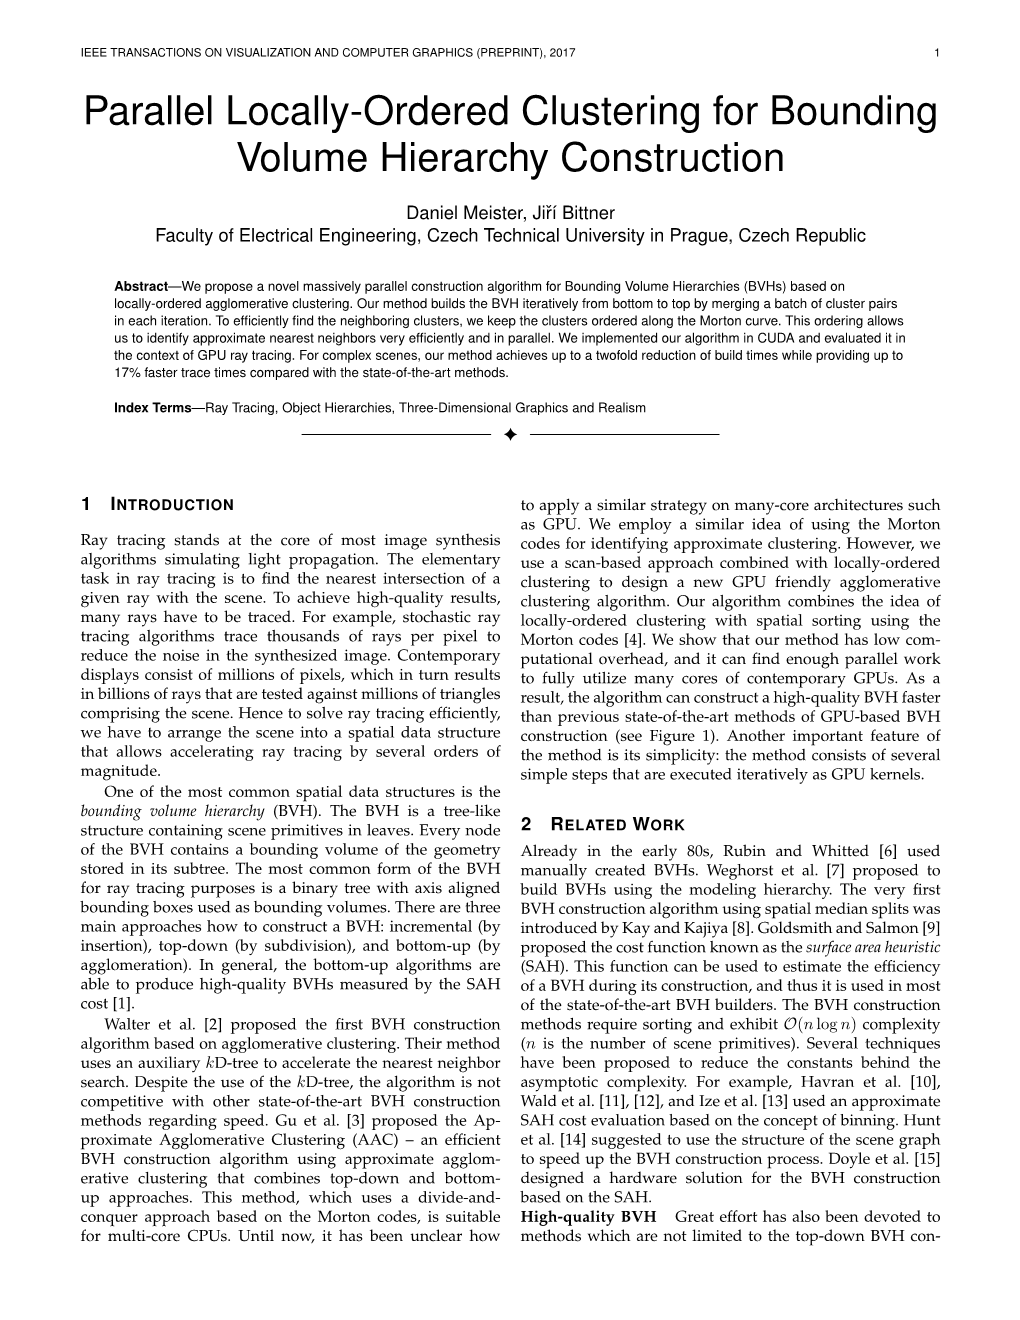 Parallel Locally-Ordered Clustering for Bounding Volume Hierarchy Construction